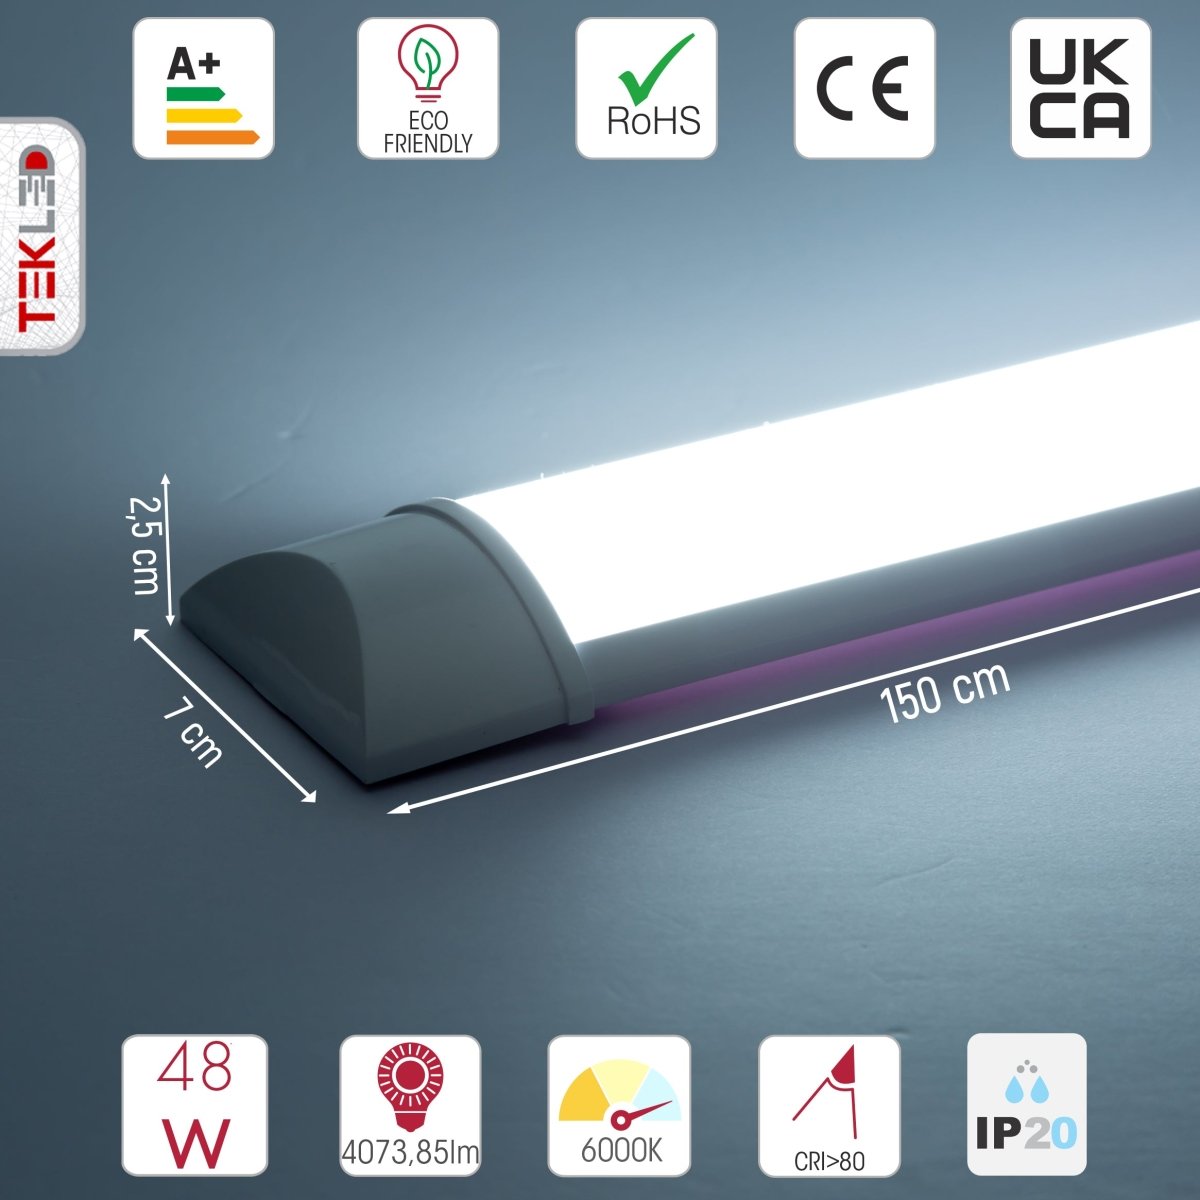 Technical specs and measurements for LED Surface Mounted Linear Fitting 48W 6500K Cool Daylight IP20 150cm 5ft